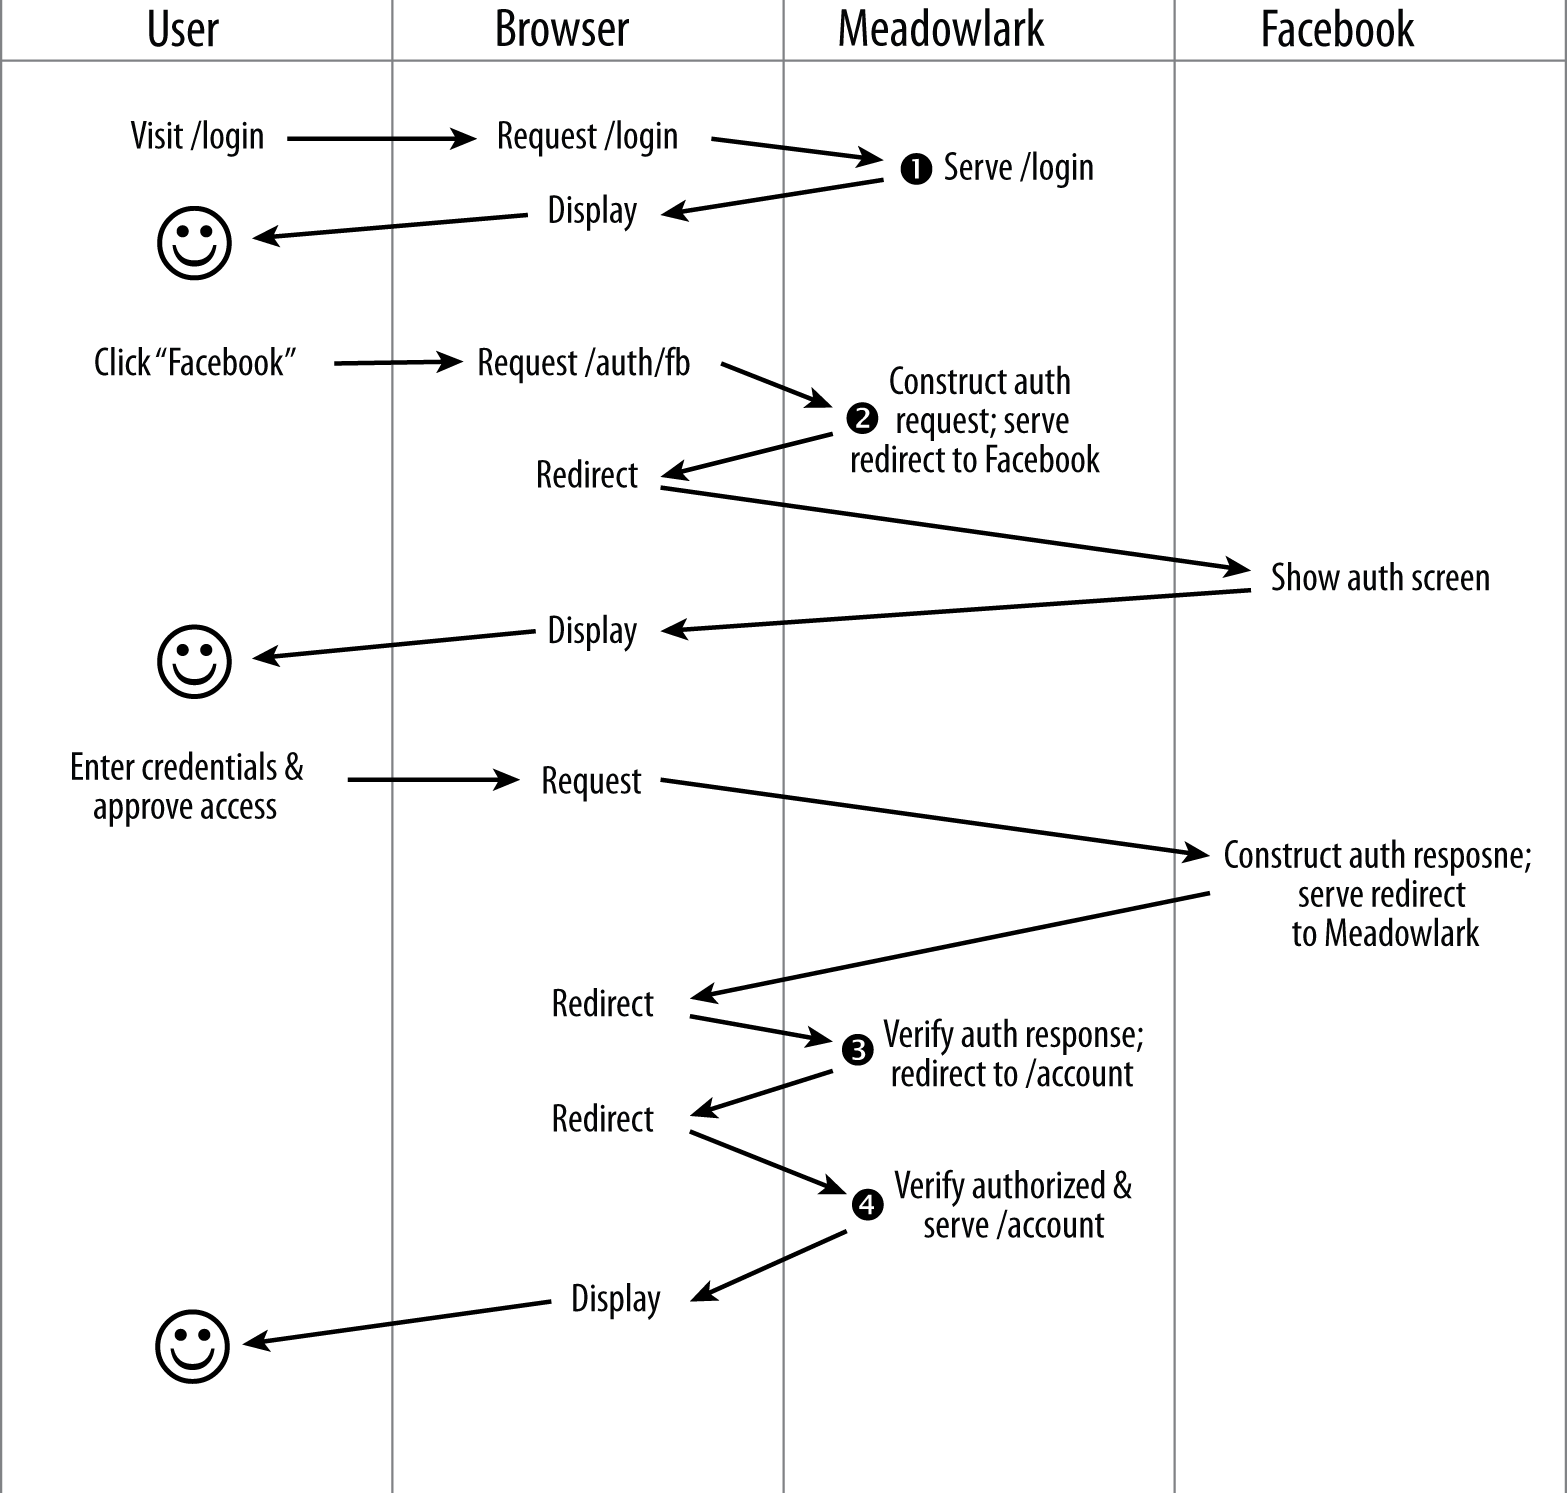 Detailed View of Third Party Authentication Flow